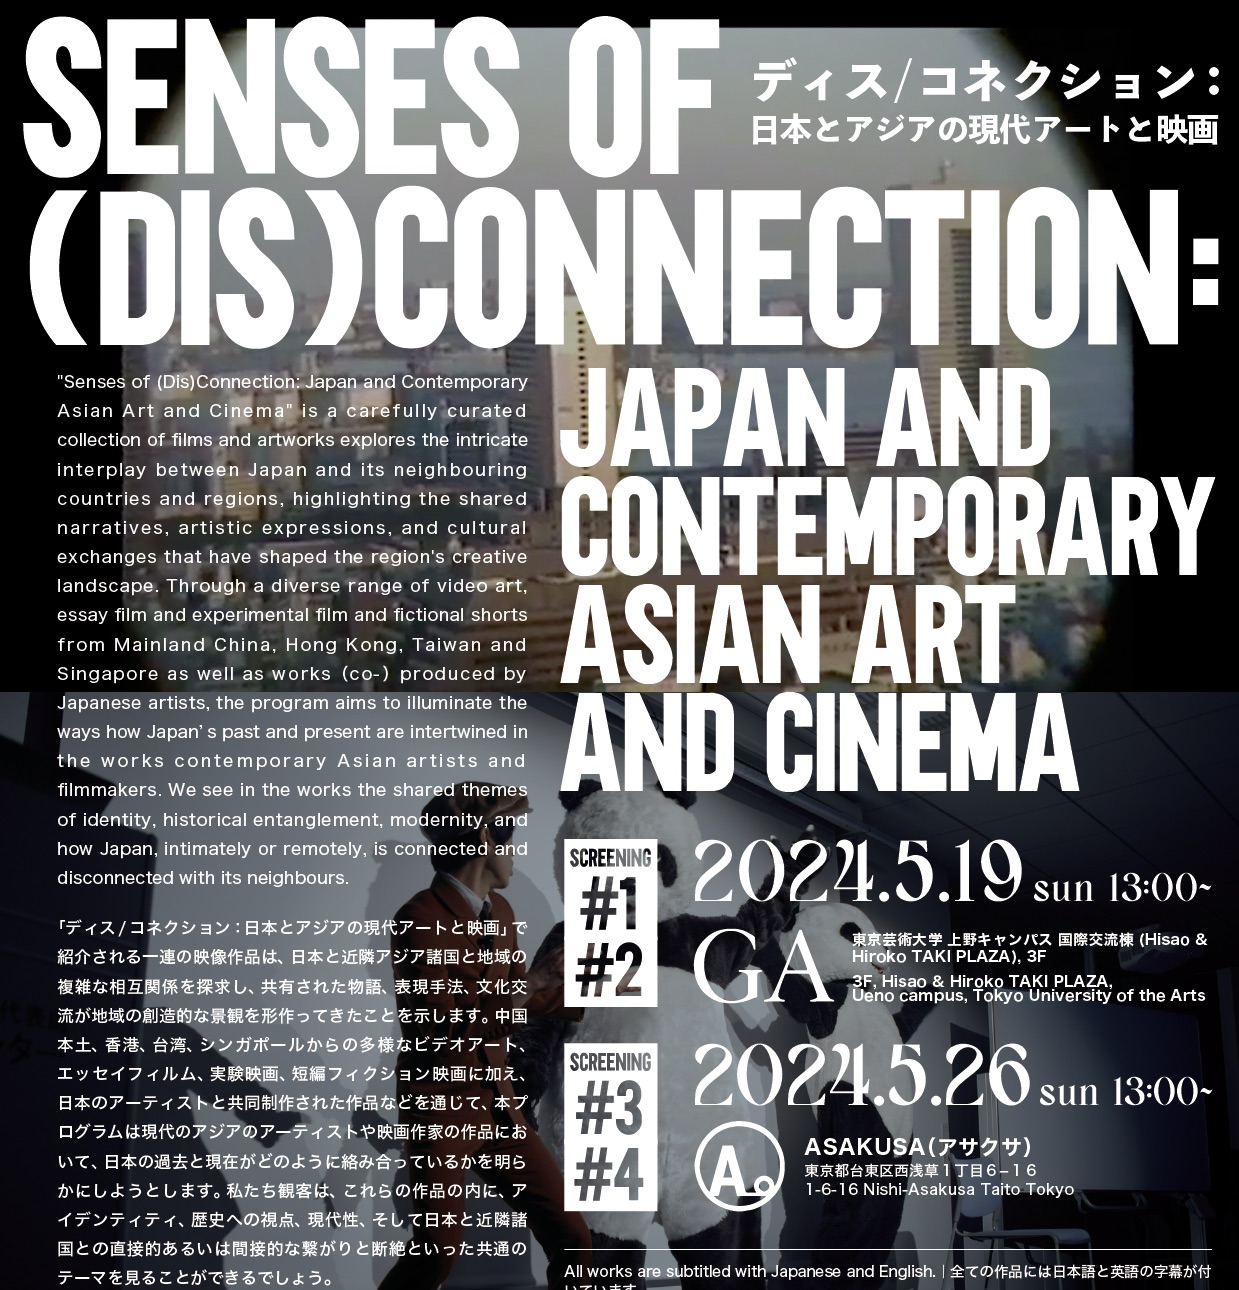 Senses Of (Dis)Connection: Japan And Contemporary Asian Art And Cinema